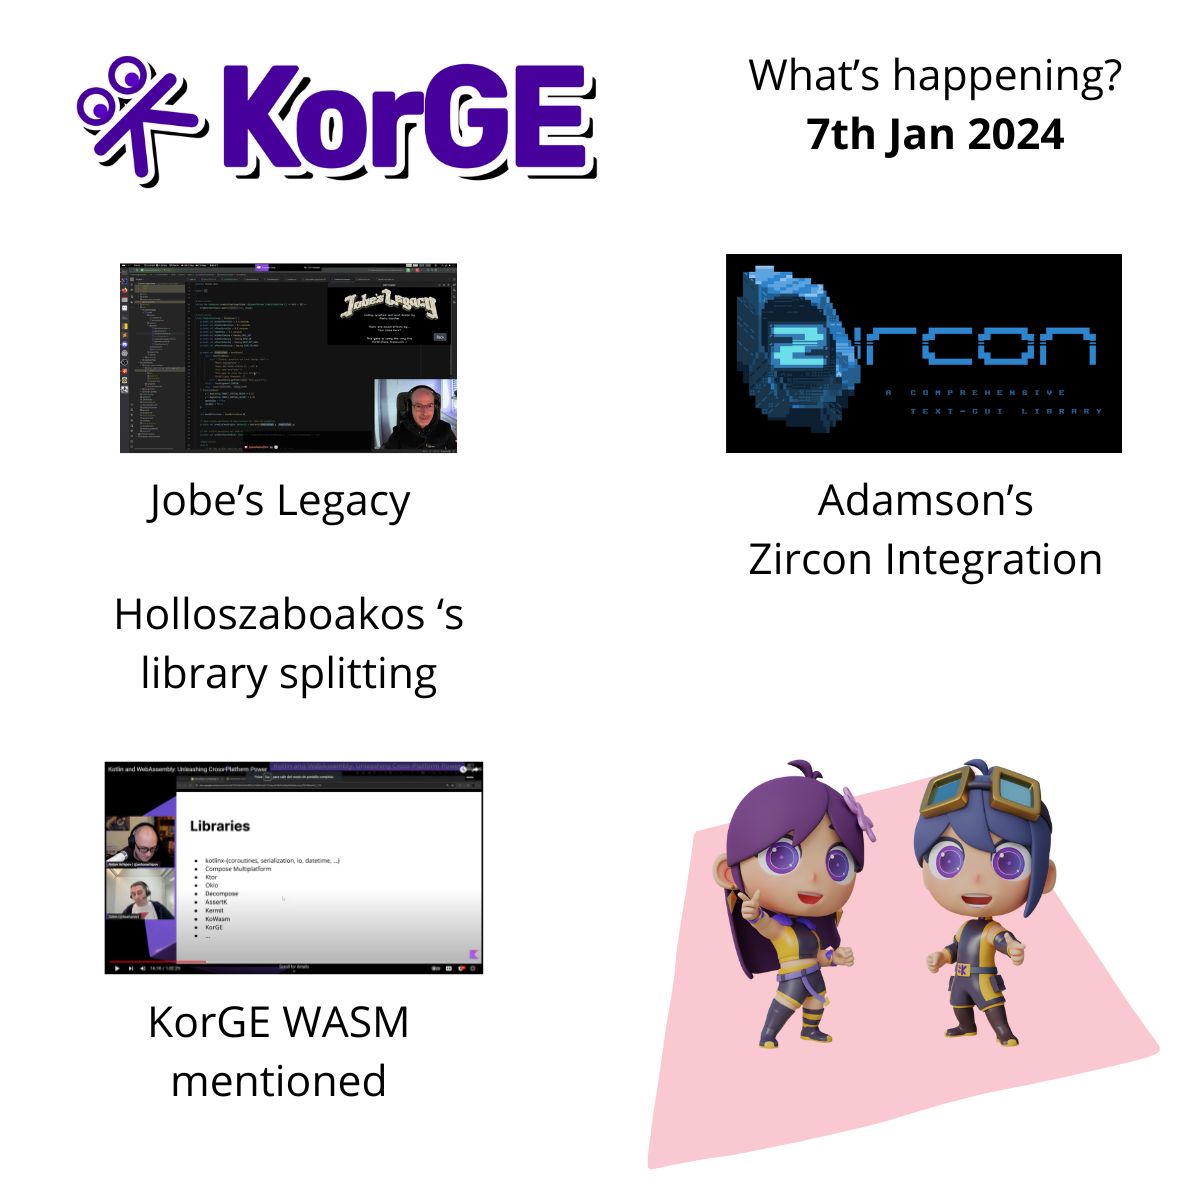 What's happening with KorGE 7th Feb 2024